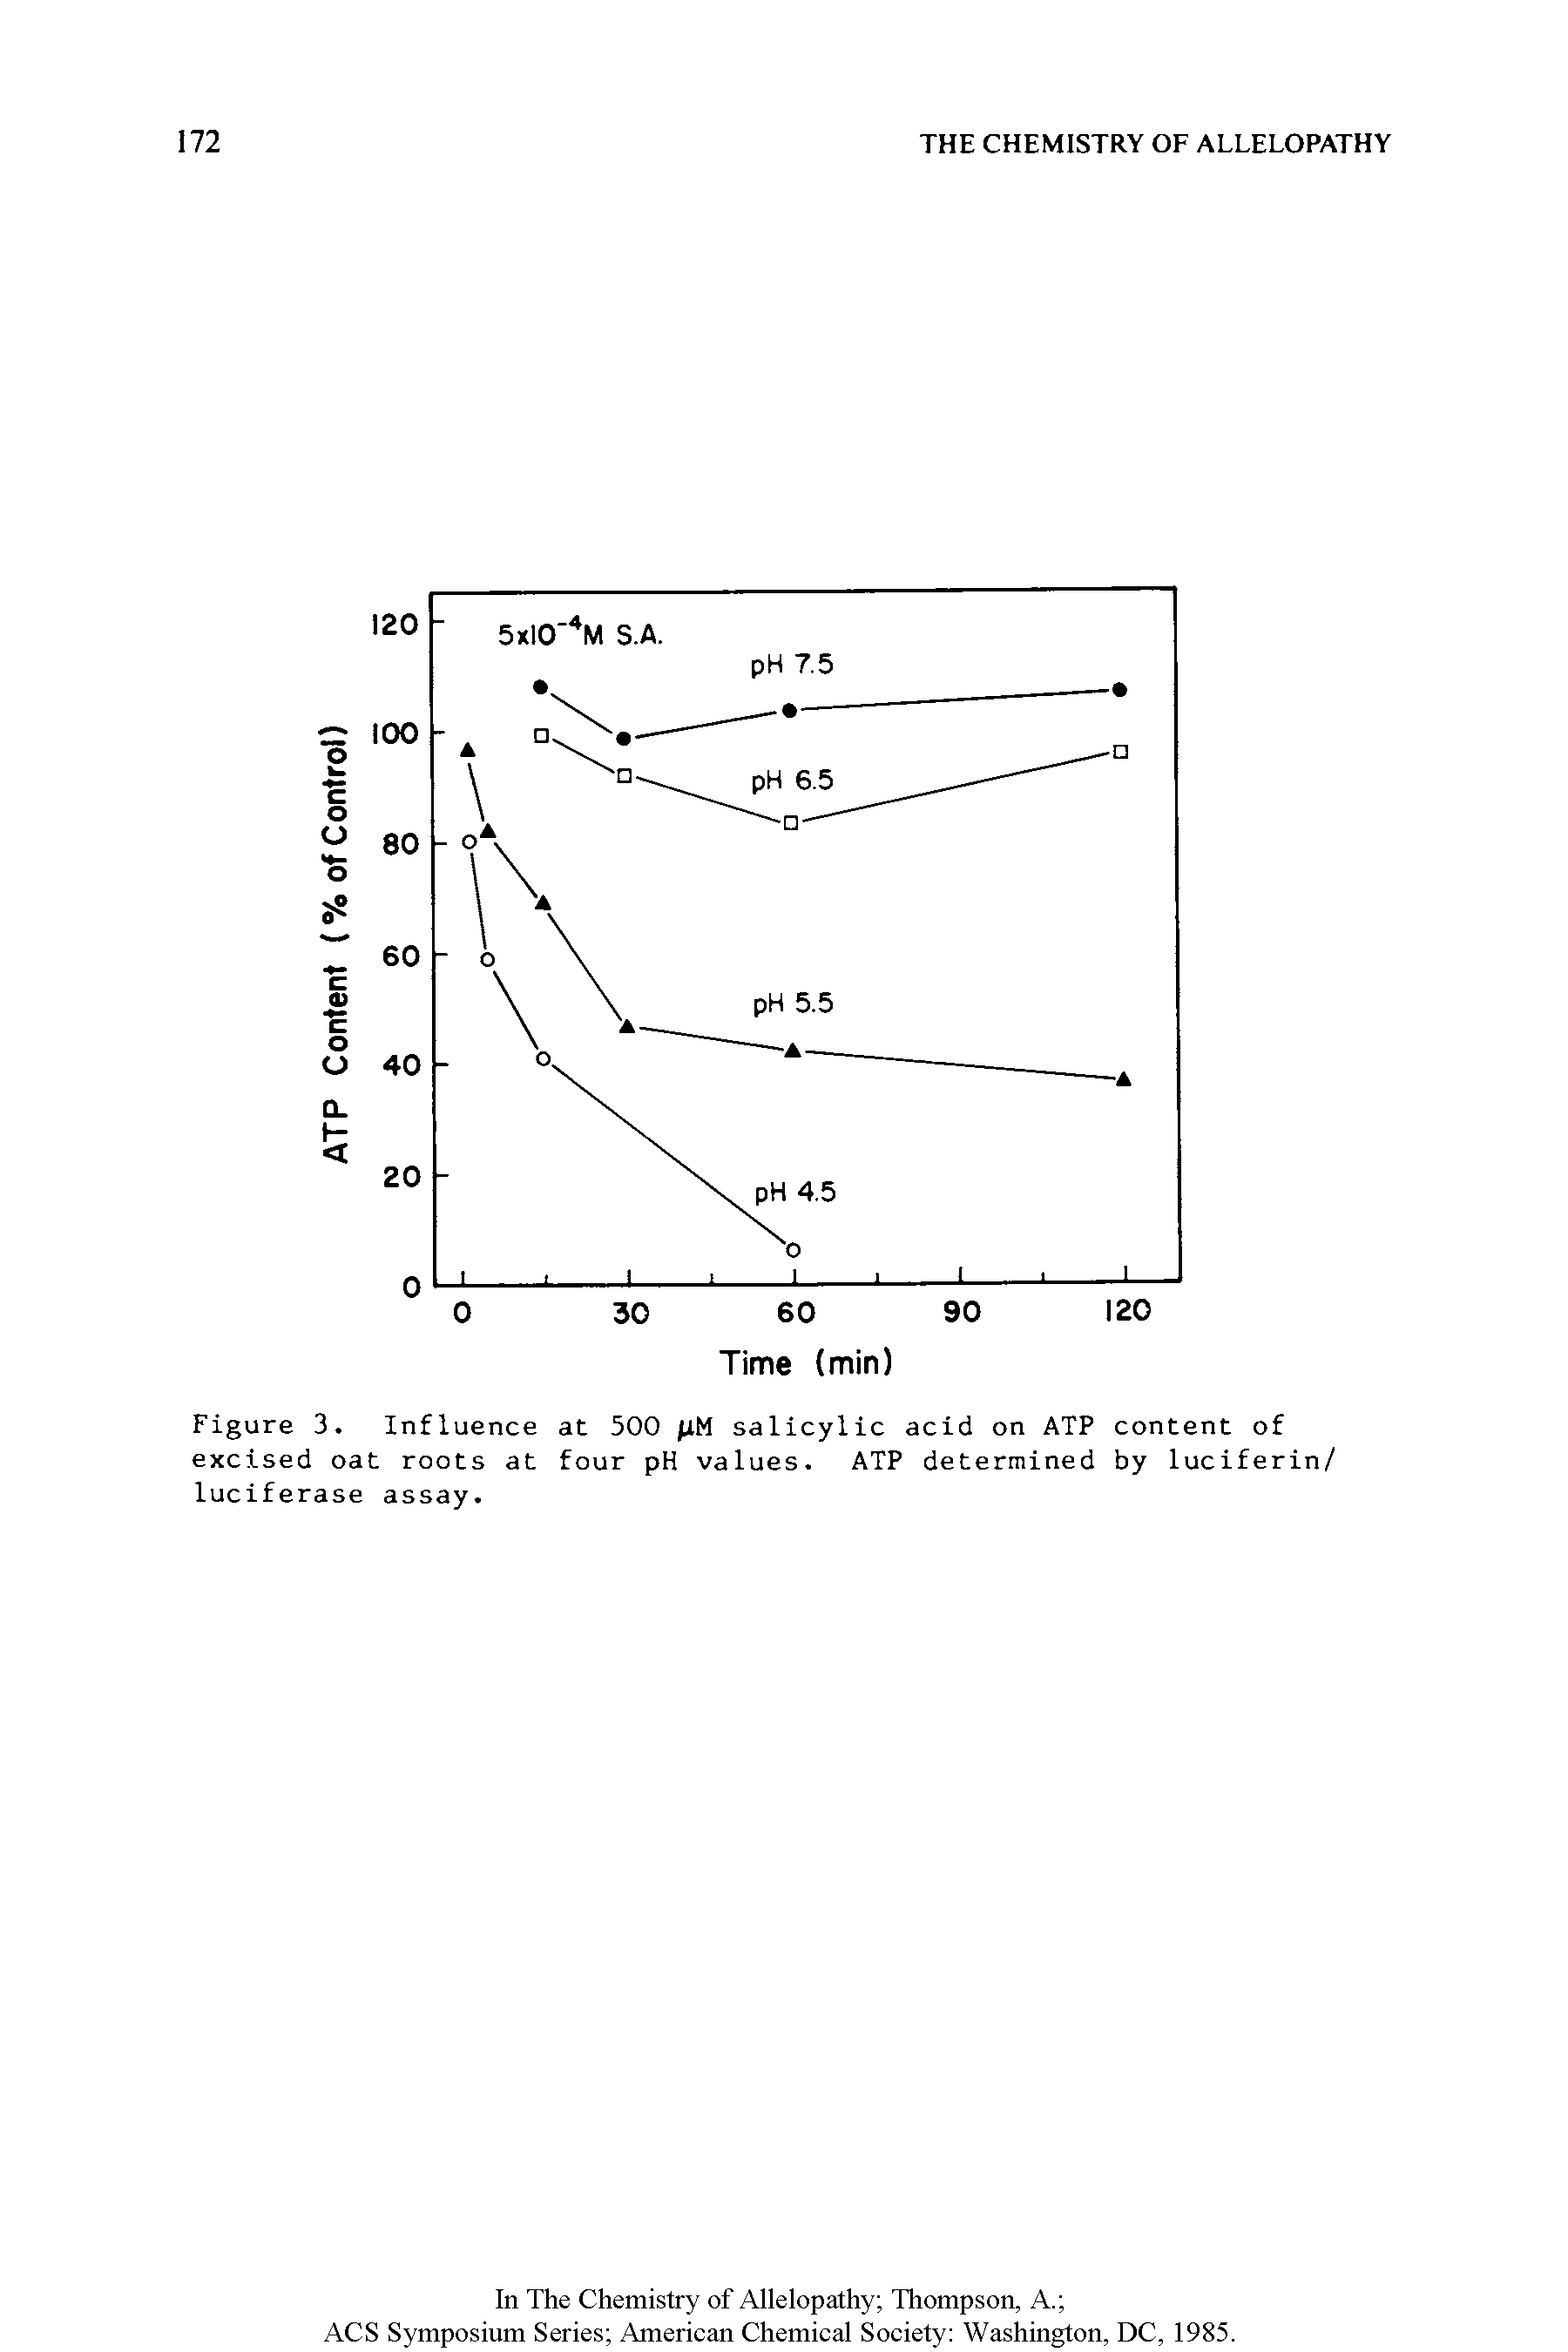 Figure 3. Influence at 500 (lM salicylic acid on ATP content of excised oat roots at four pH values. ATP determined by luciferin/ luciferase assay.